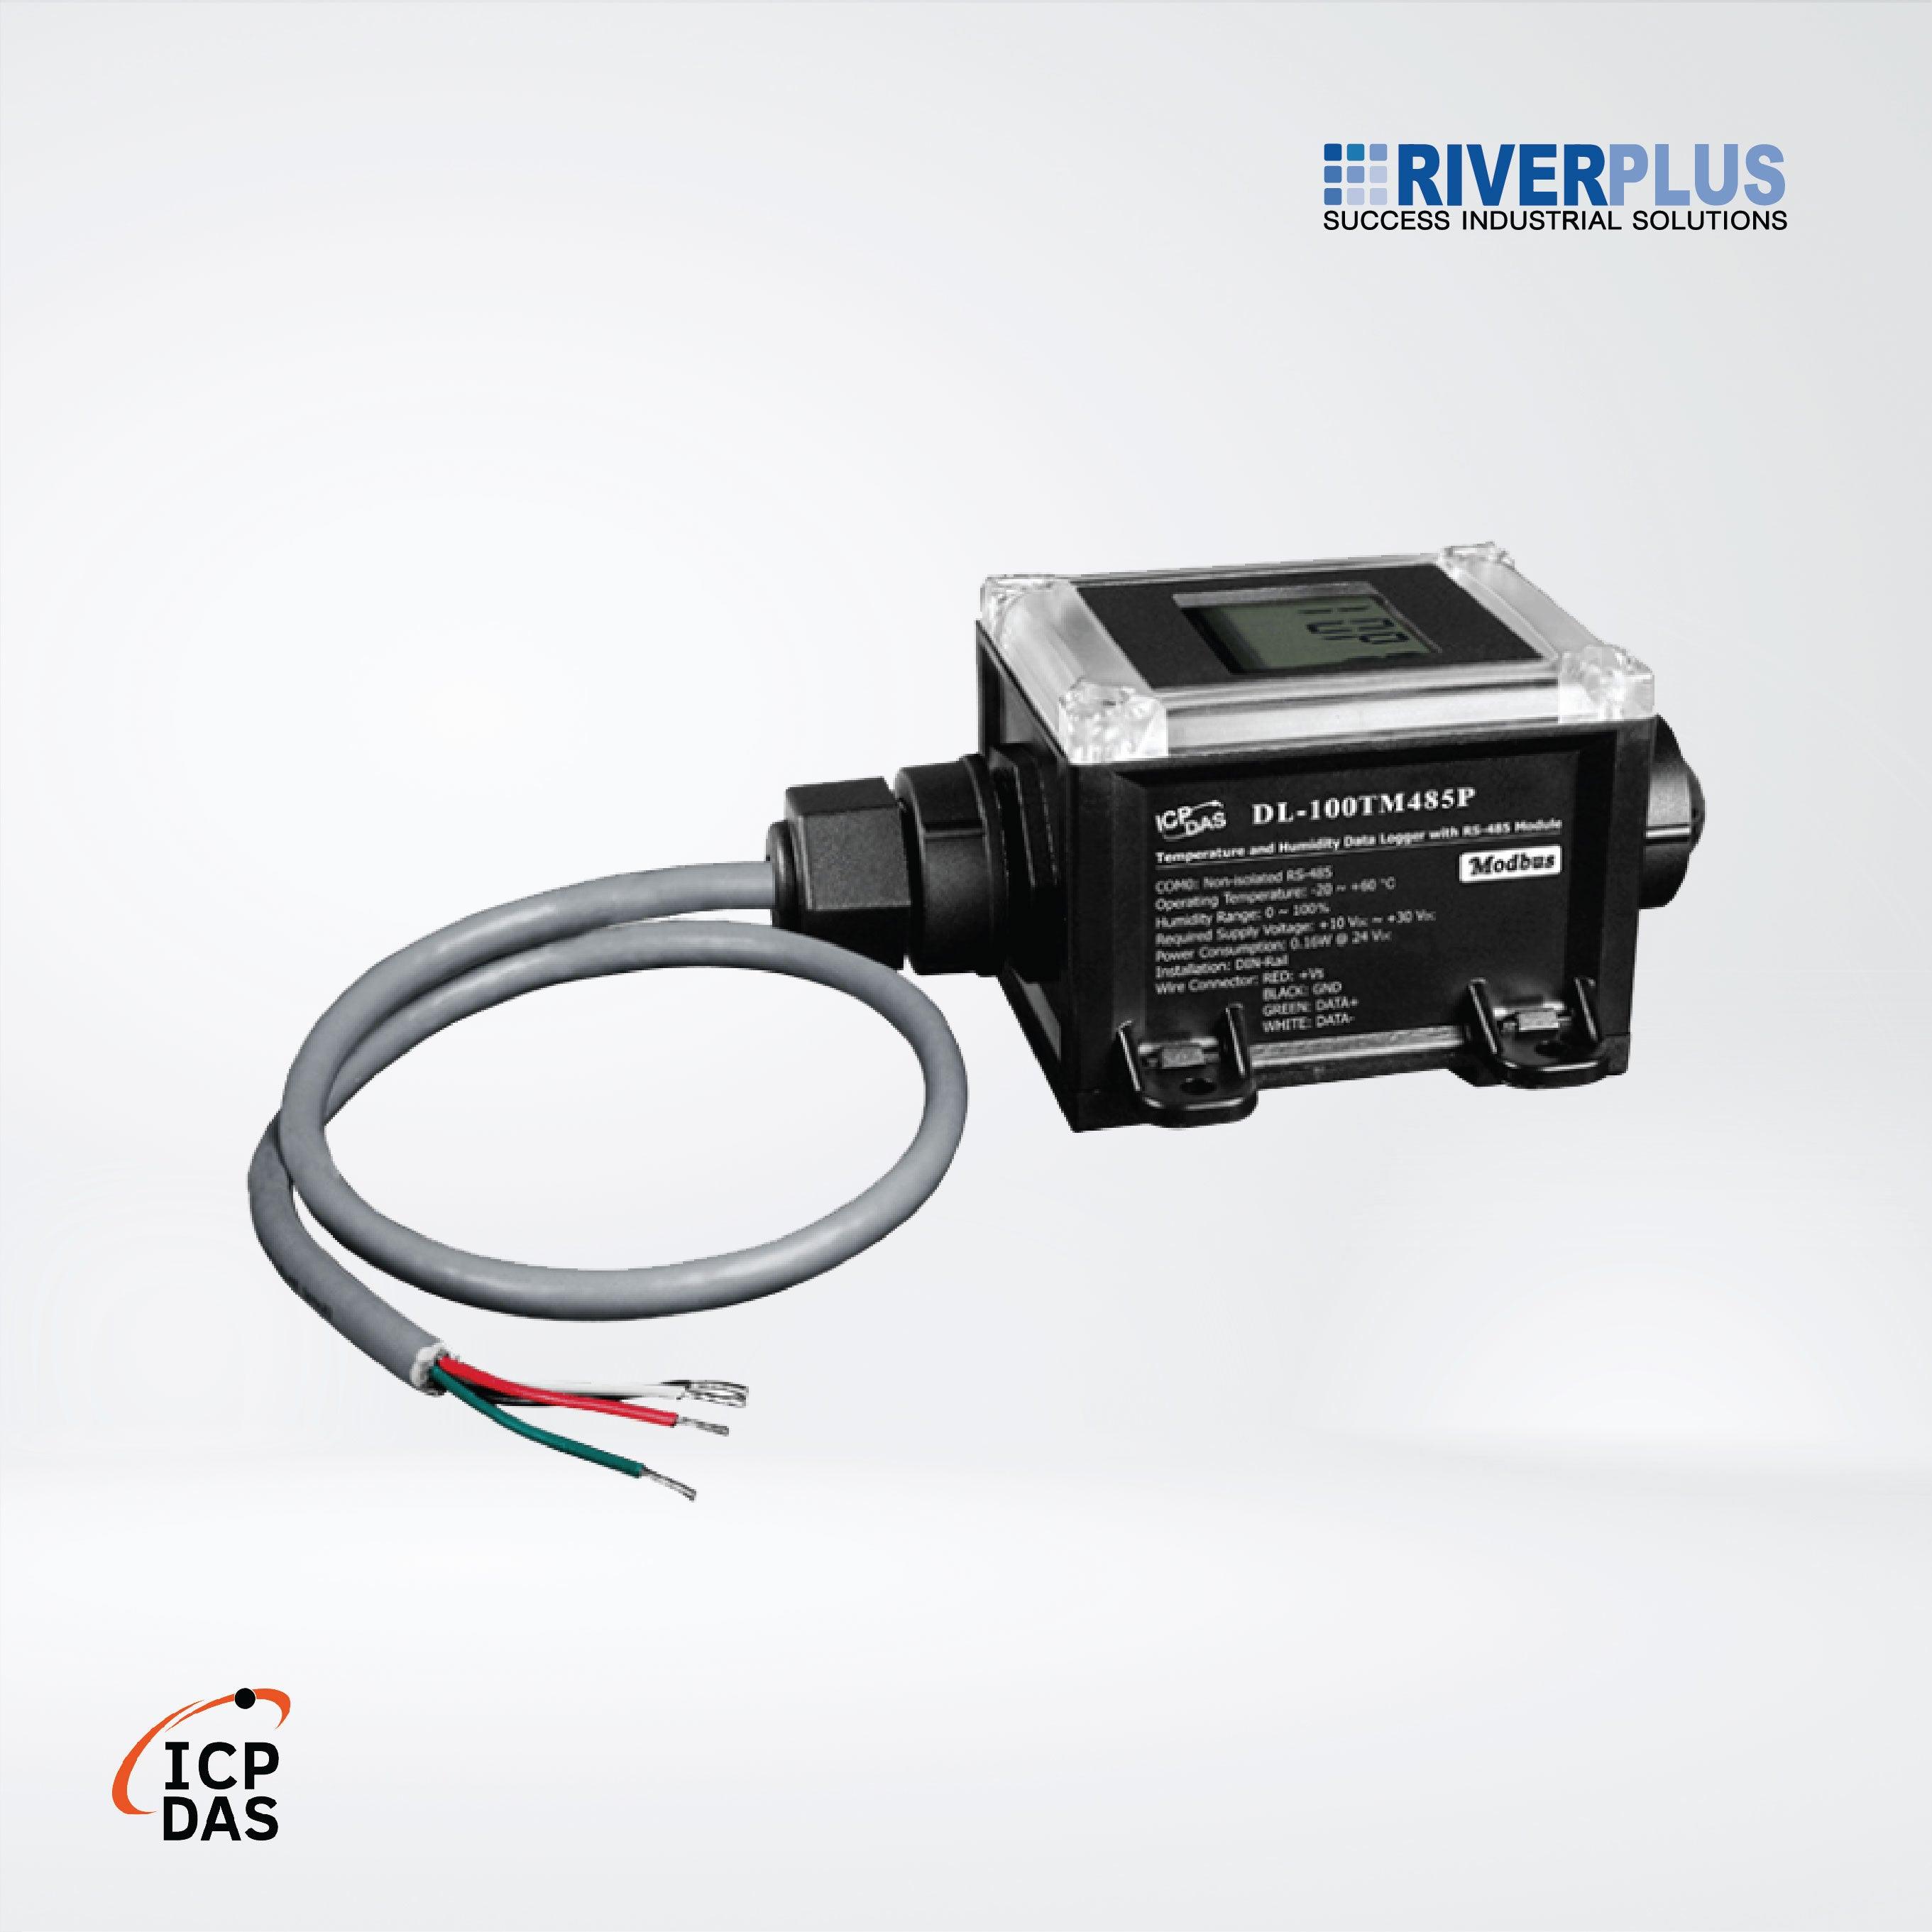 DL-100TM485P IP66 Remote Temperature and Humidity Data Logger with LCD Display - Riverplus